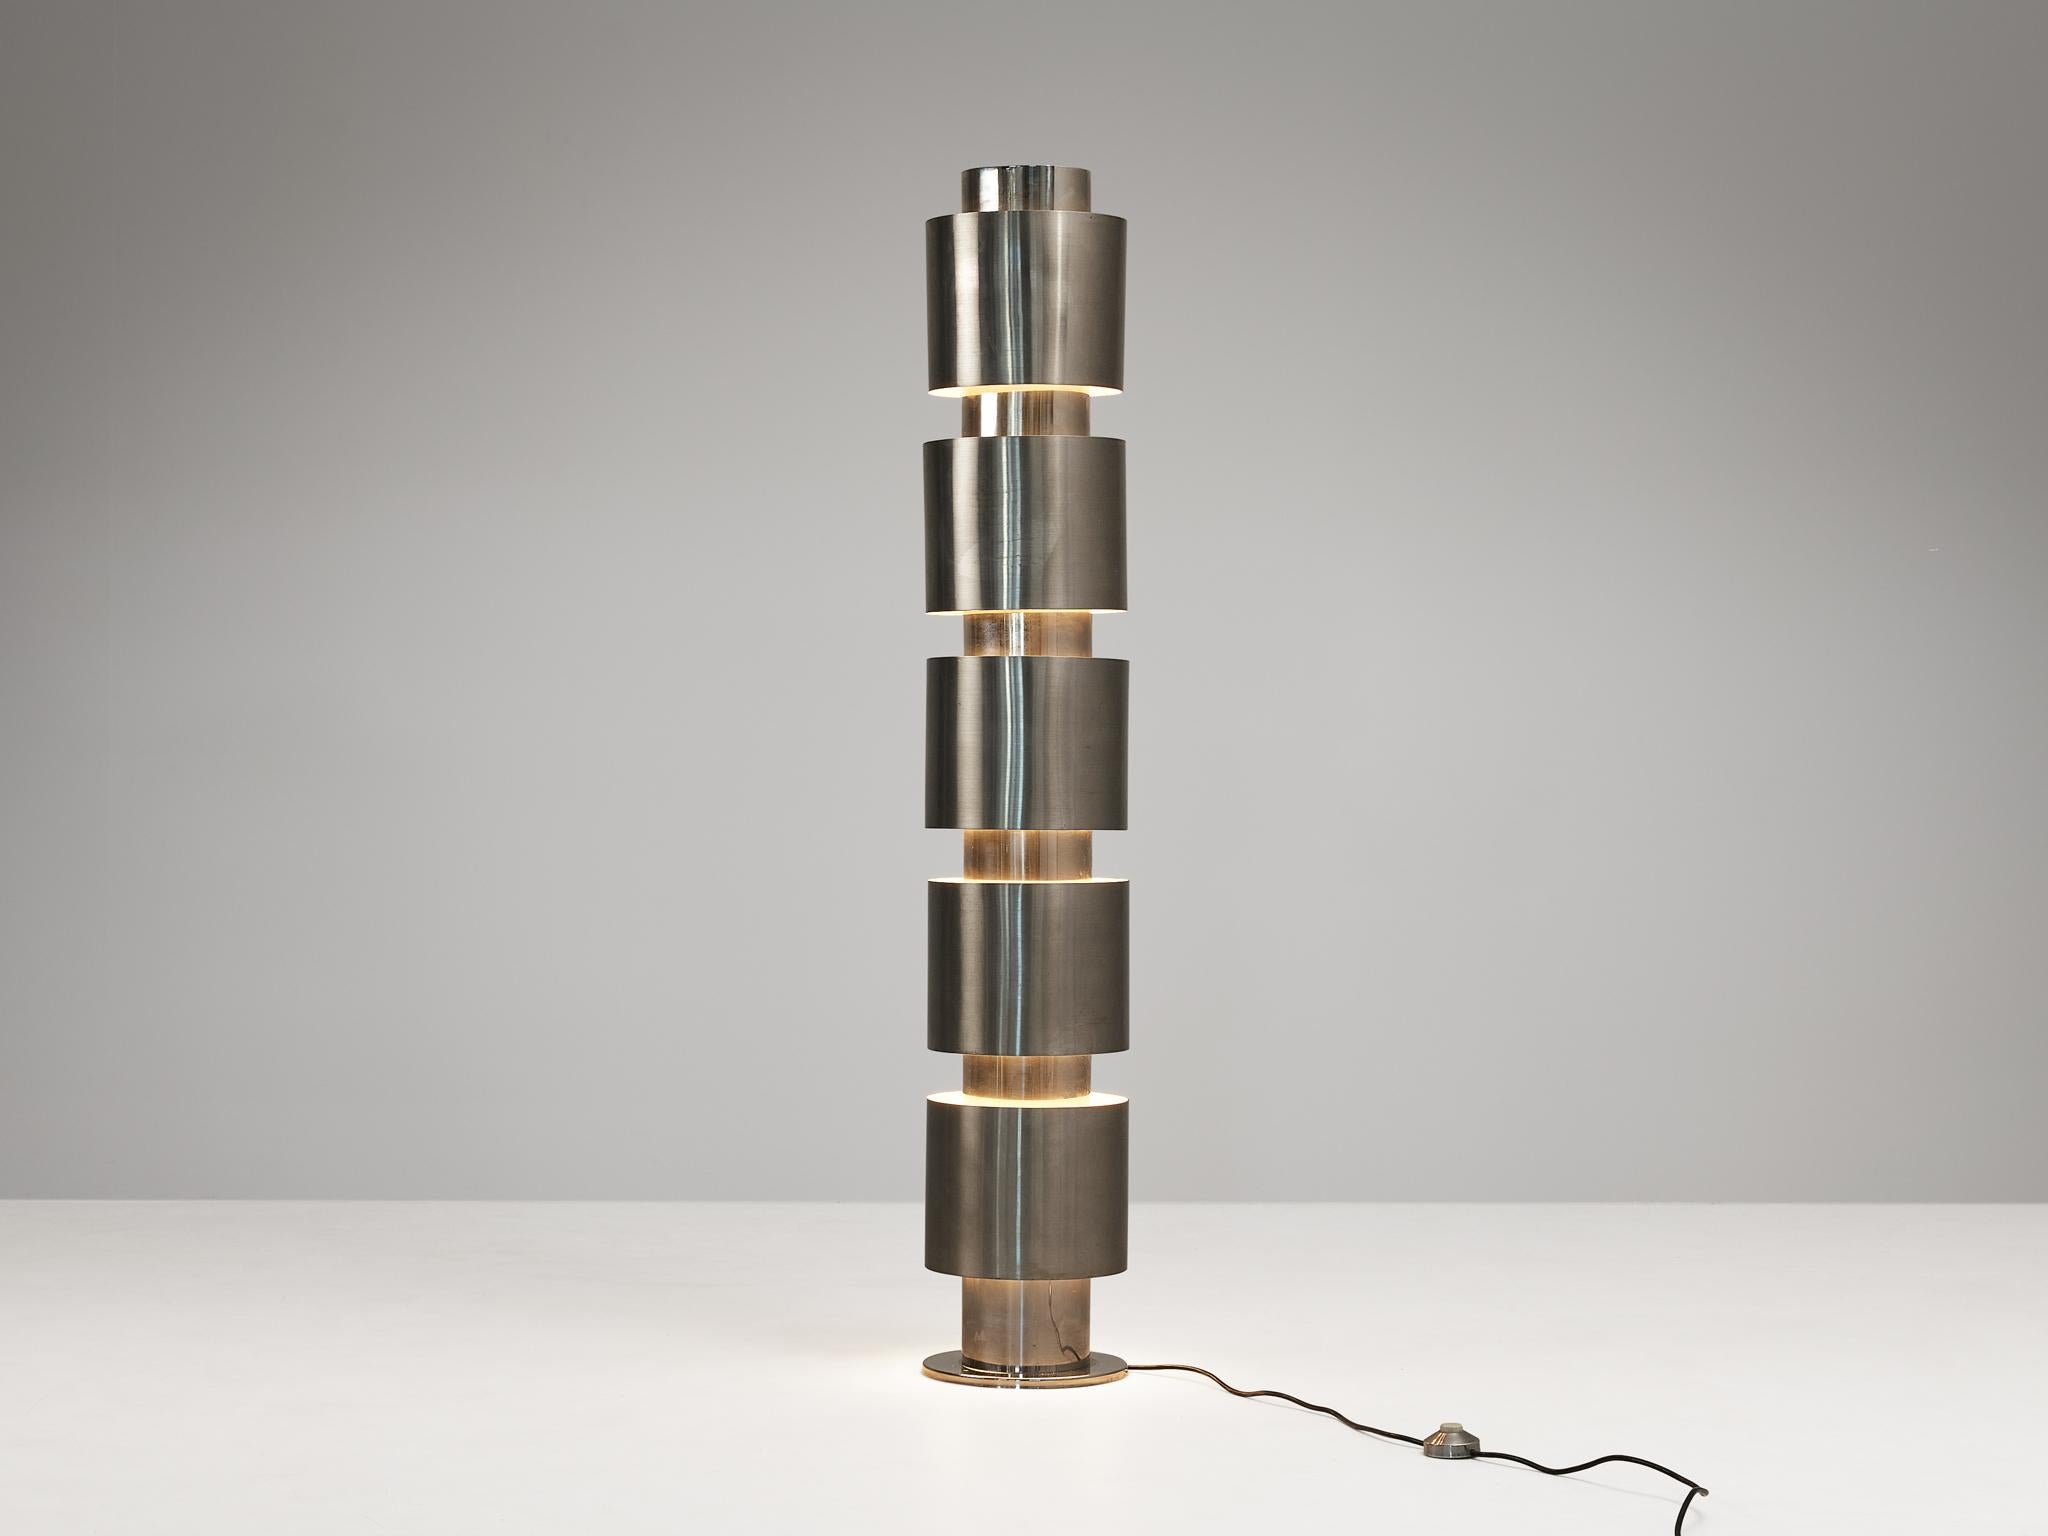 Willy Rizzo for Laboratori Ob-Or Luminating Roma, floor lamp, stainless steel, chrome-plated steel, Italy, 1970s

This unique floor lamp is designed by Italian designer Willy Rizzo in the early 1970s. The design is mainly carried out through a